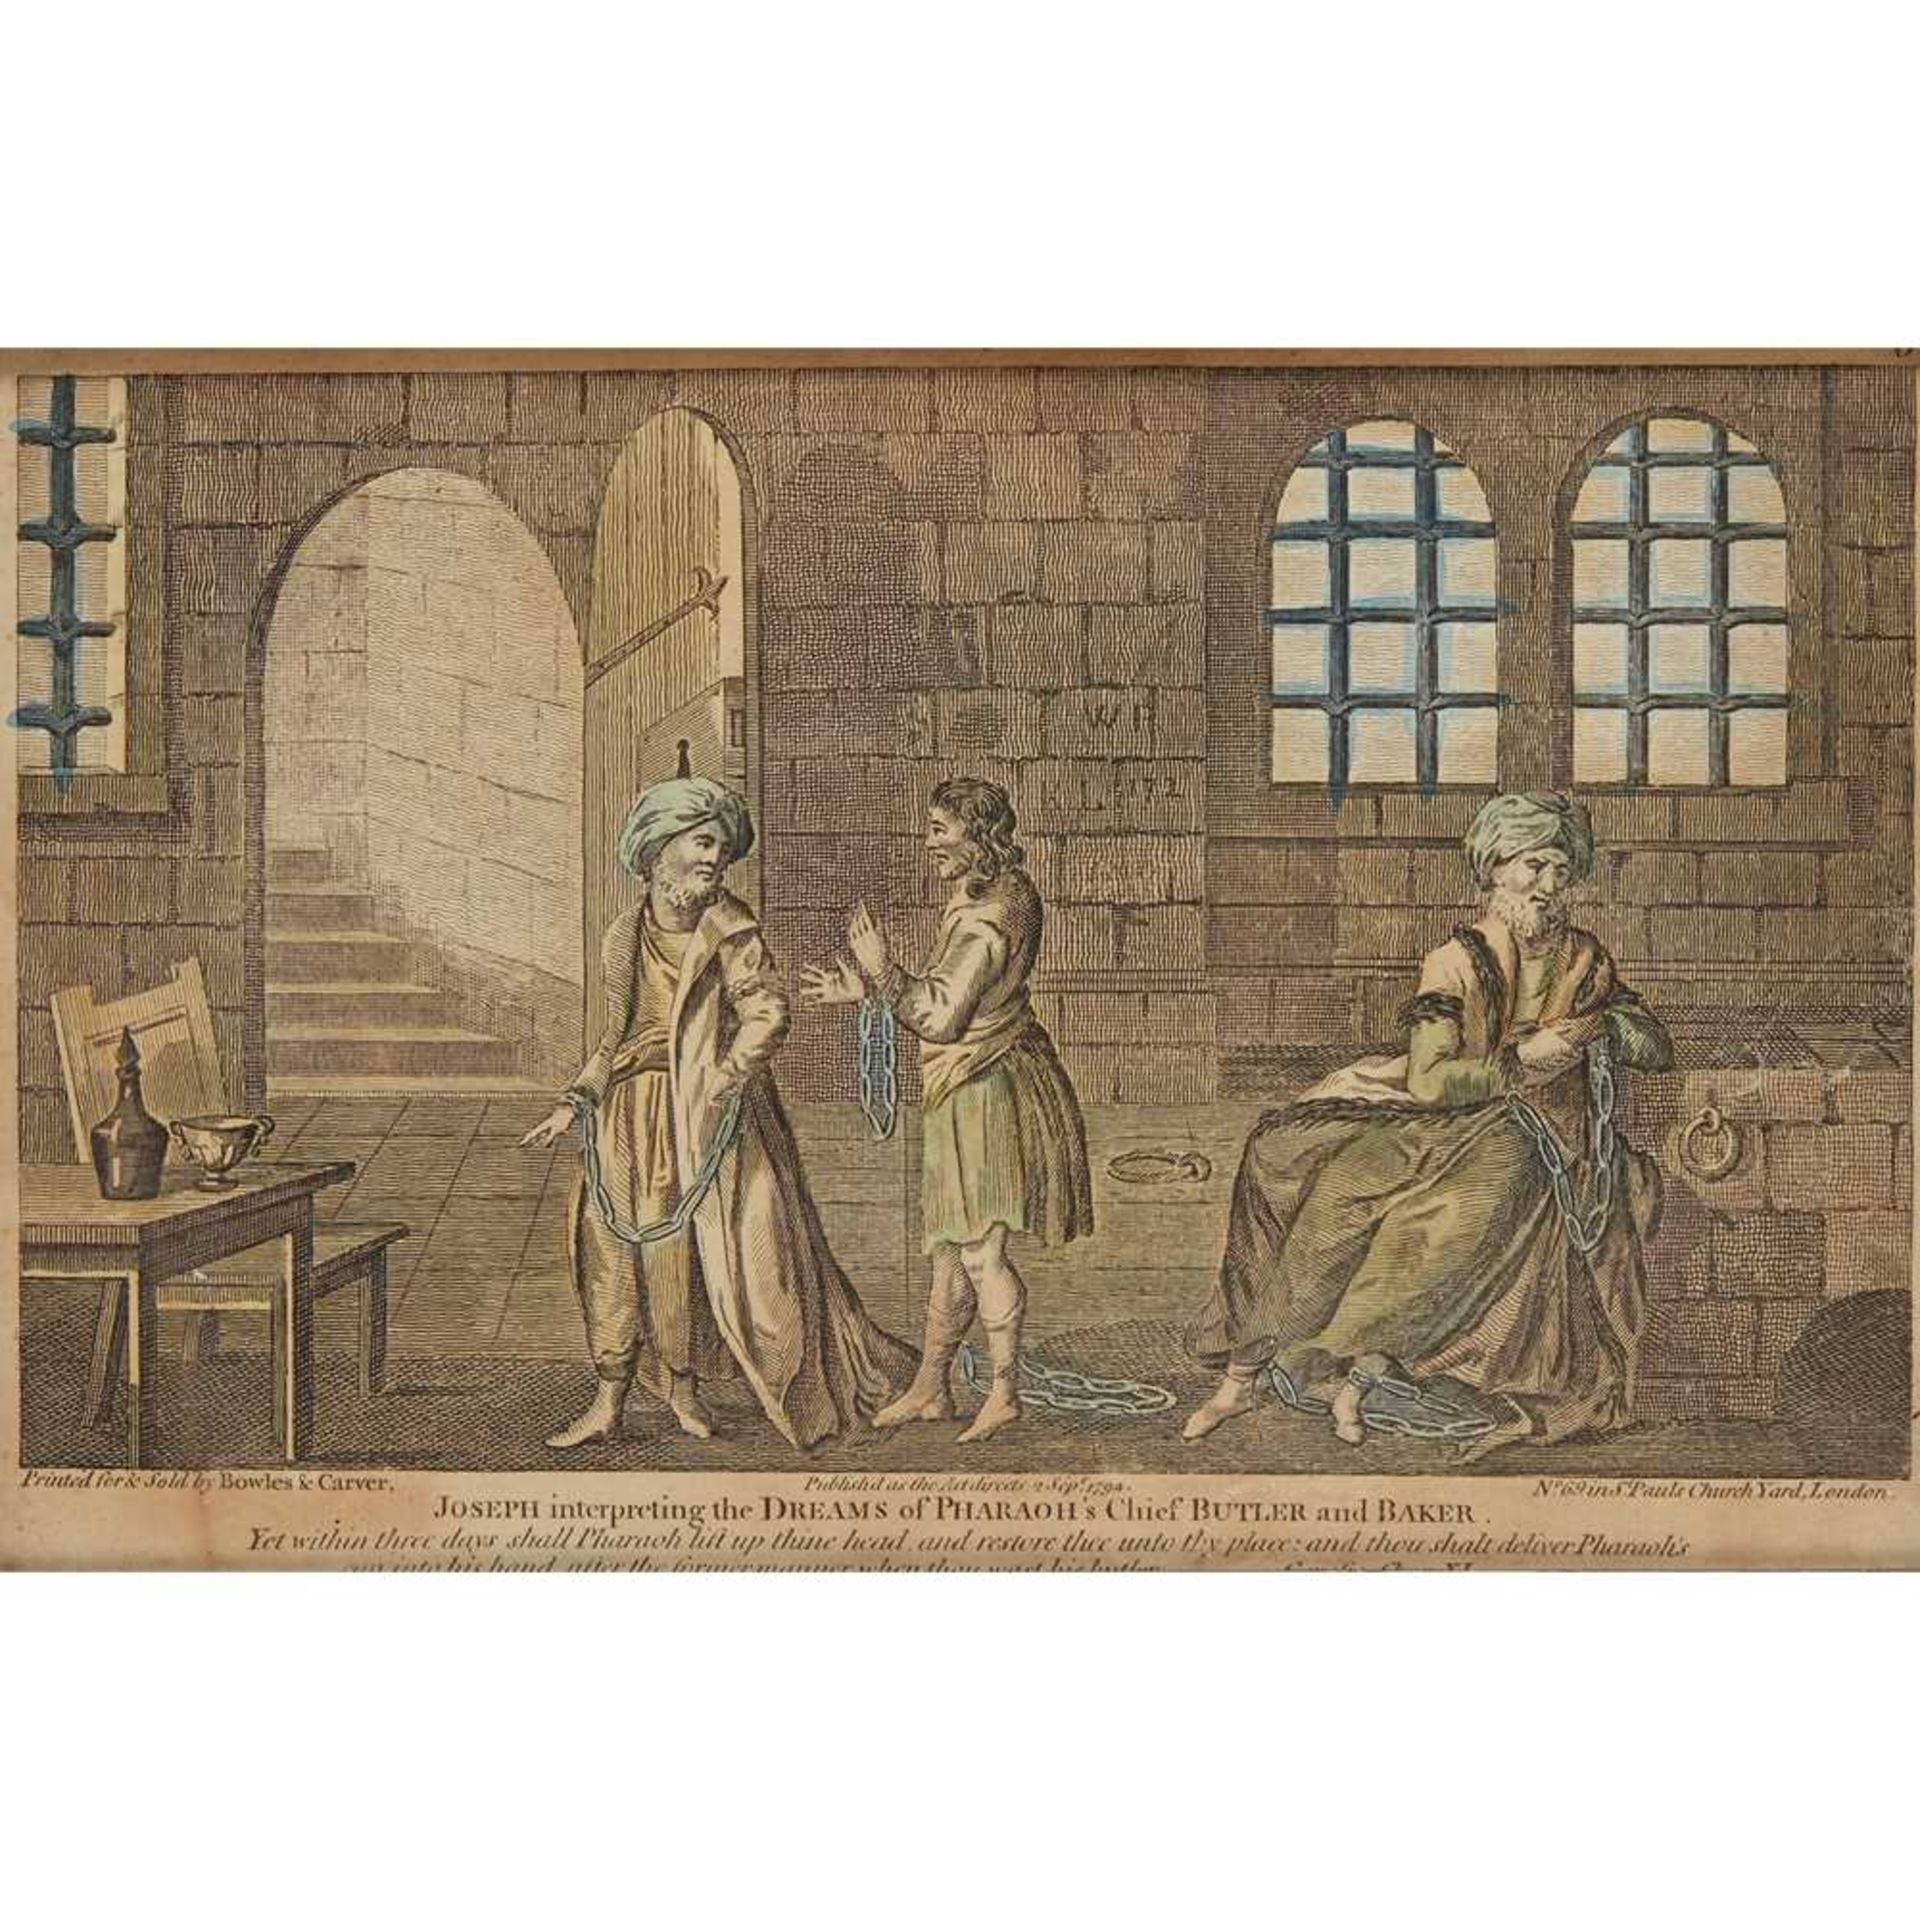 SET OF FOUR COLOURED ENGRAVINGS FROM THE SACRED HISTORY OF JOSEPH AND HIS BRETHREN, PUBLISHED BY BOW - Image 8 of 12